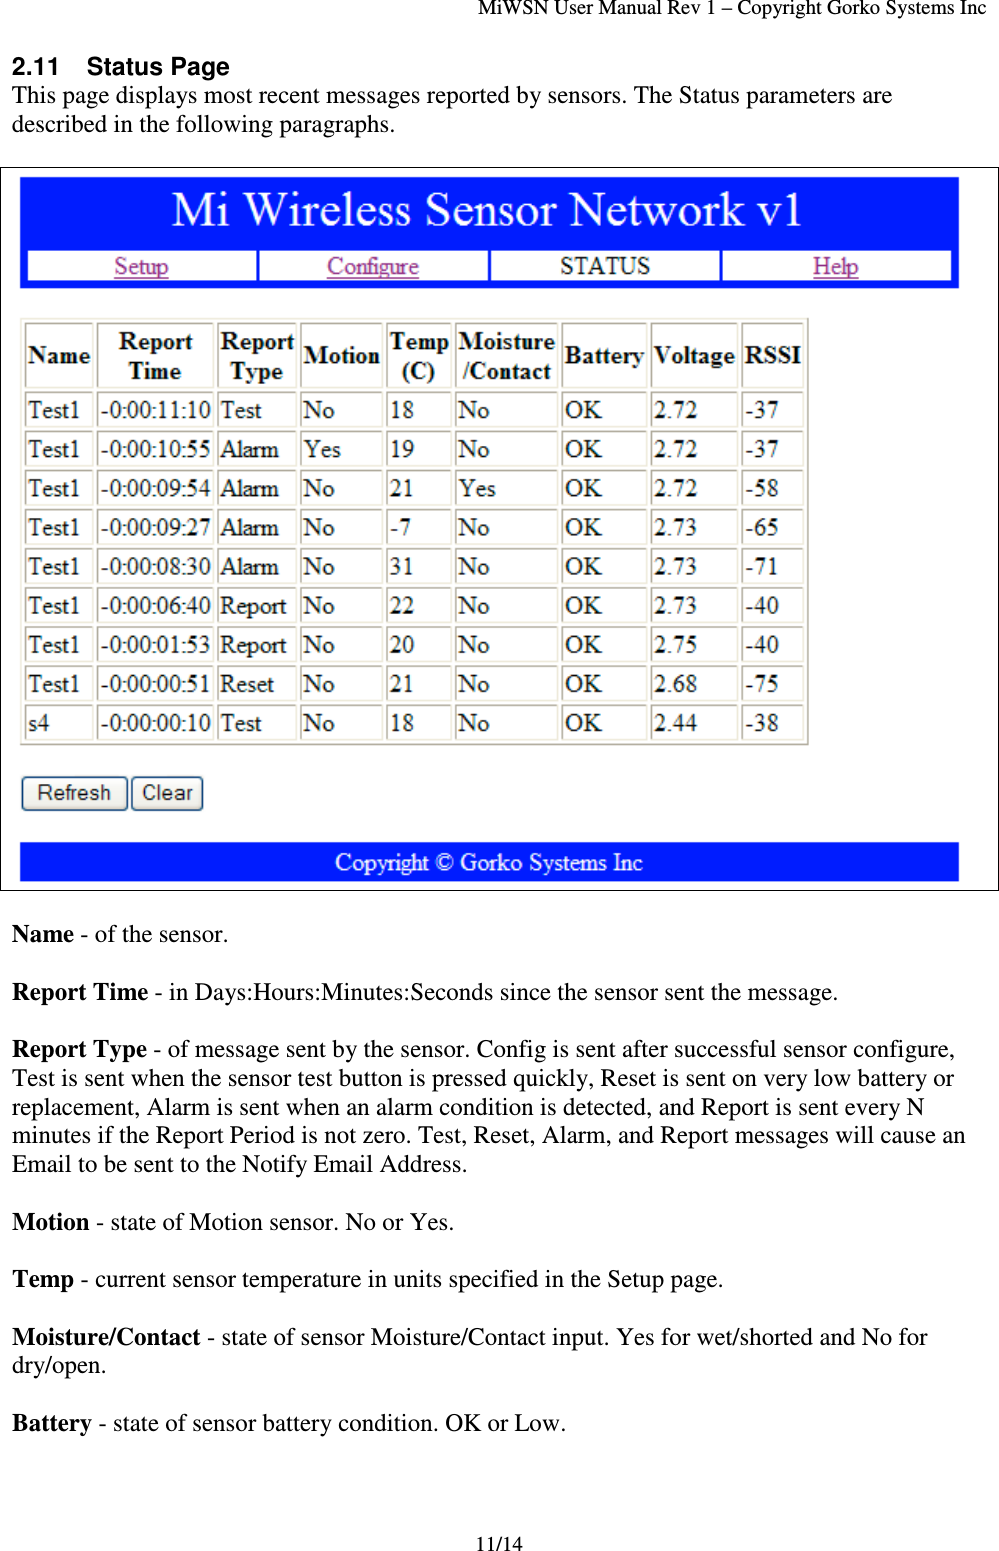 MiWSN User Manual Rev 1 – Copyright Gorko Systems Inc11/142.11 Status PageThis page displays most recent messages reported by sensors. The Status parameters aredescribed in the following paragraphs.Name - of the sensor.Report Time - in Days:Hours:Minutes:Seconds since the sensor sent the message.Report Type - of message sent by the sensor. Config is sent after successful sensor configure,Test is sent when the sensor test button is pressed quickly, Reset is sent on very low battery orreplacement, Alarm is sent when an alarm condition is detected, and Report is sent every Nminutes if the Report Period is not zero. Test, Reset, Alarm, and Report messages will cause anEmail to be sent to the Notify Email Address.Motion - state of Motion sensor. No or Yes.Temp - current sensor temperature in units specified in the Setup page.Moisture/Contact - state of sensor Moisture/Contact input. Yes for wet/shorted and No fordry/open.Battery - state of sensor battery condition. OK or Low.